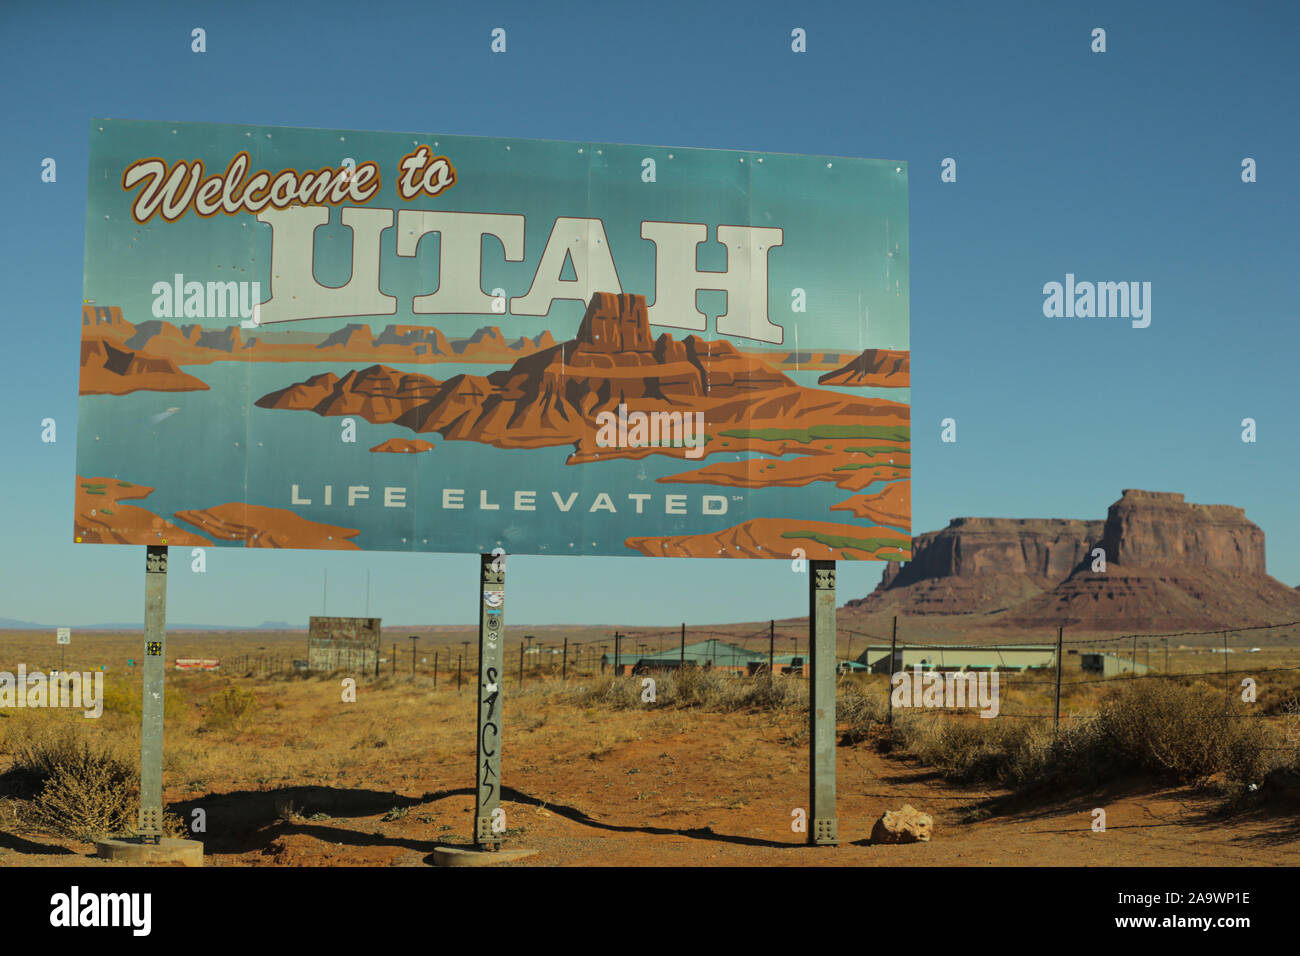 MONUMENT VALLEY, UTAH, USA -NOVEMBER 12, 2019: Welcome to Utah state border sign right in the Monument Valley. Stock Photo